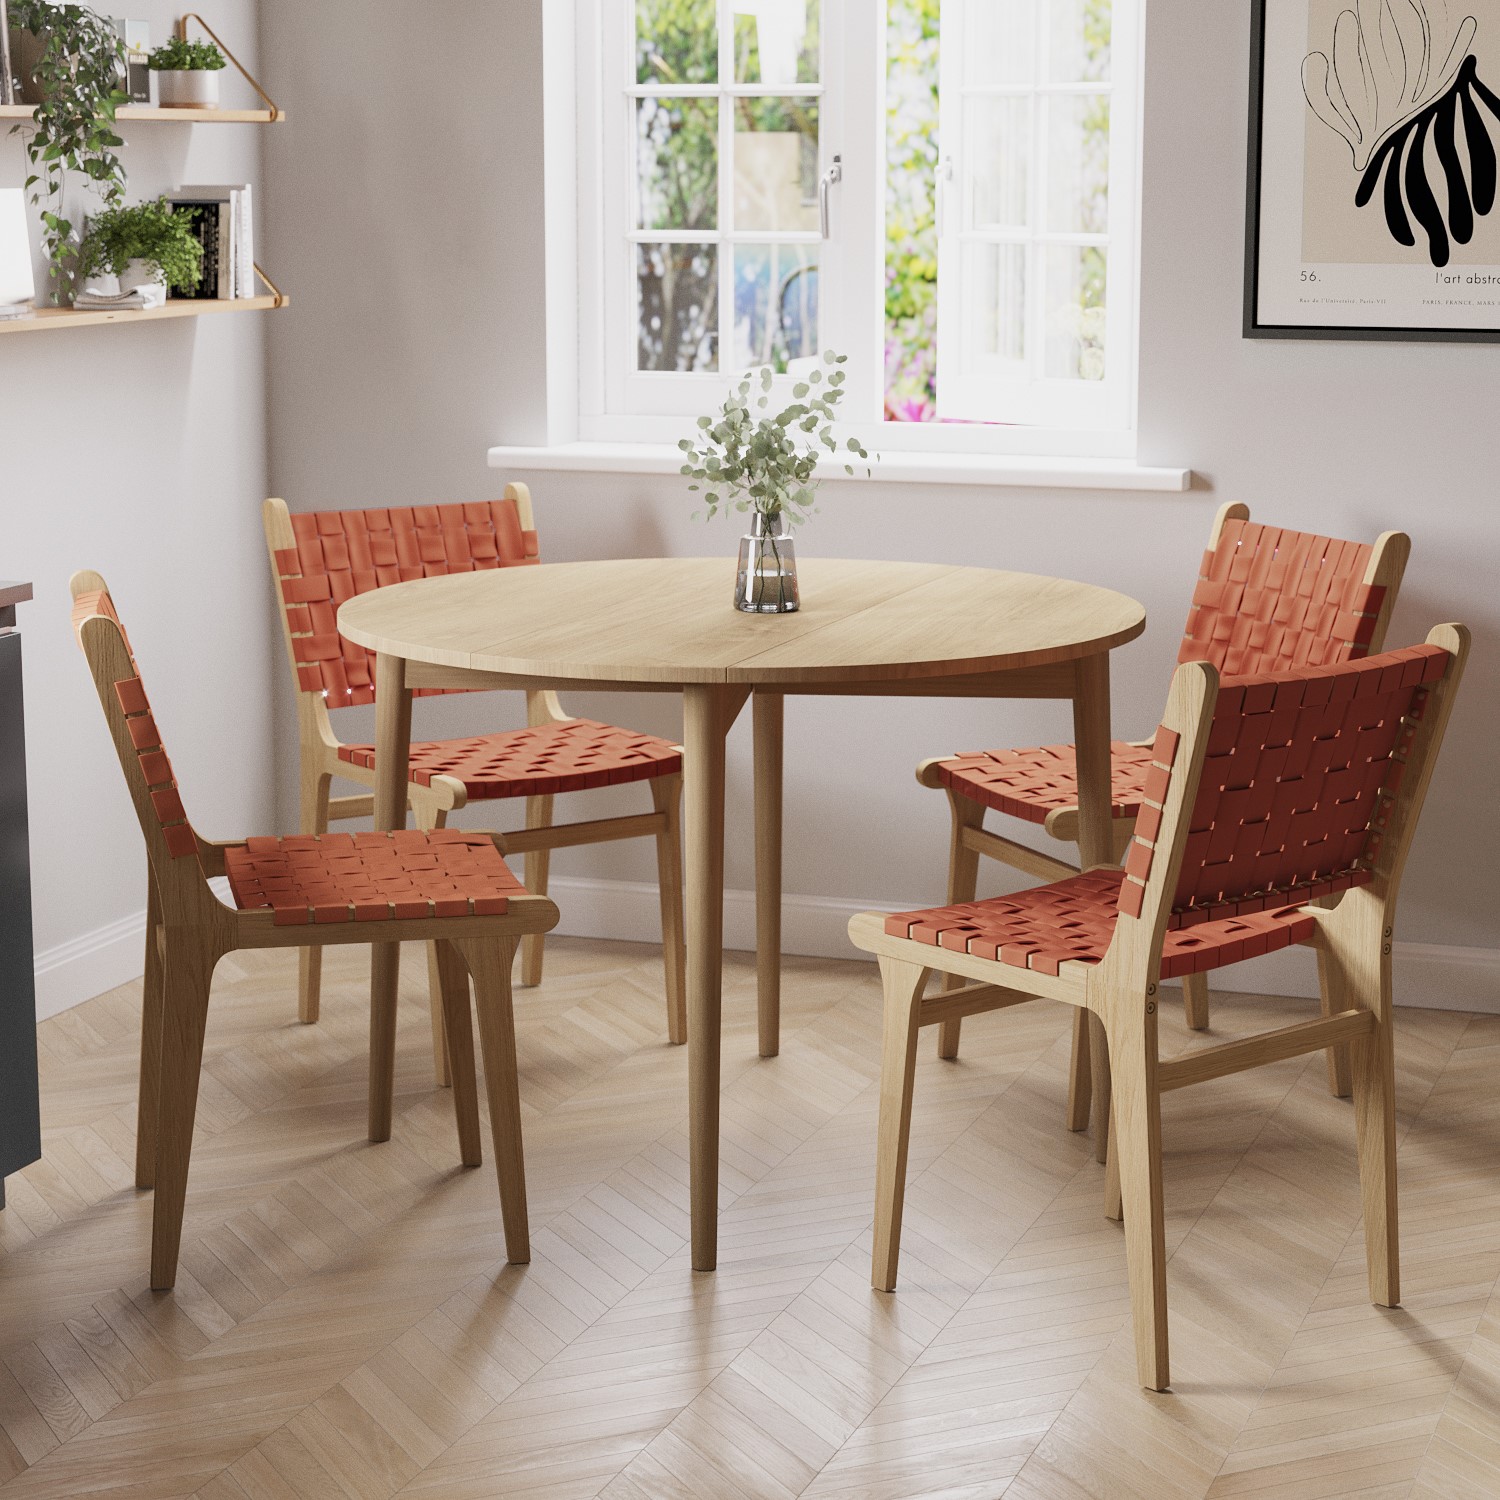 Photo of Round oak drop leaf dining table with 4 tan faux leather dining chairs - rudy